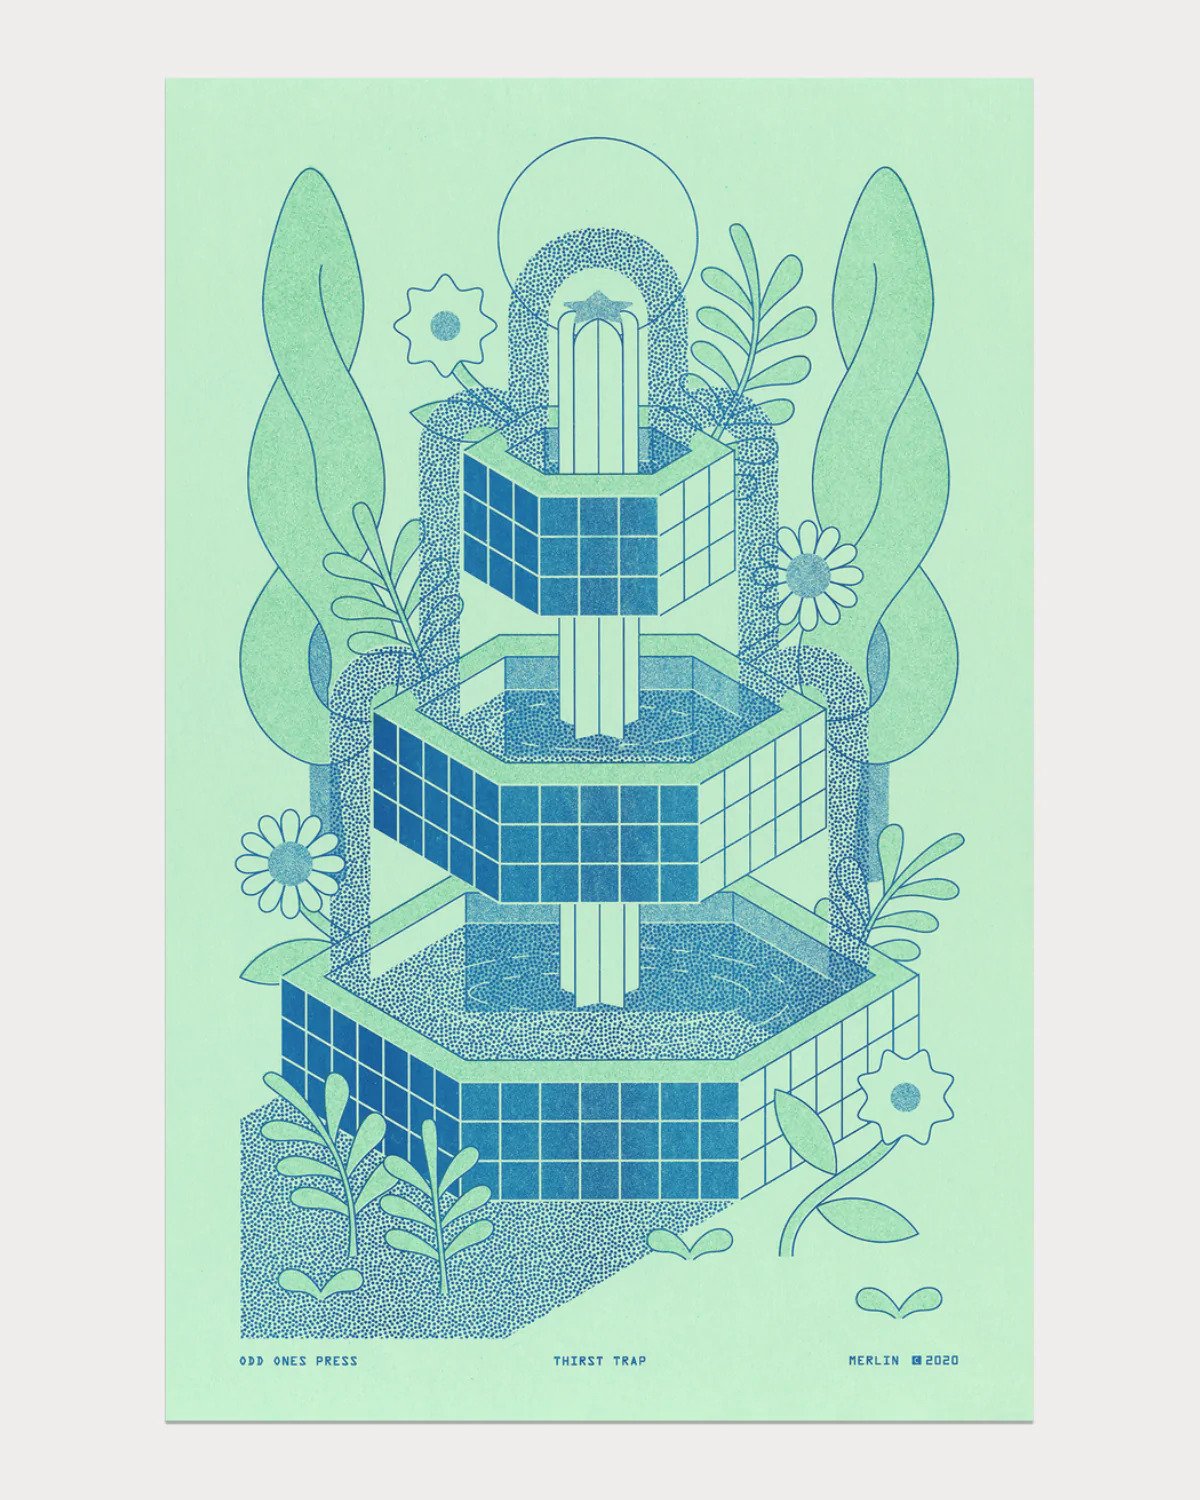 Teal risograph print showing what looks like a foundation with three levels, and shrubbery and flowers surrounding it.